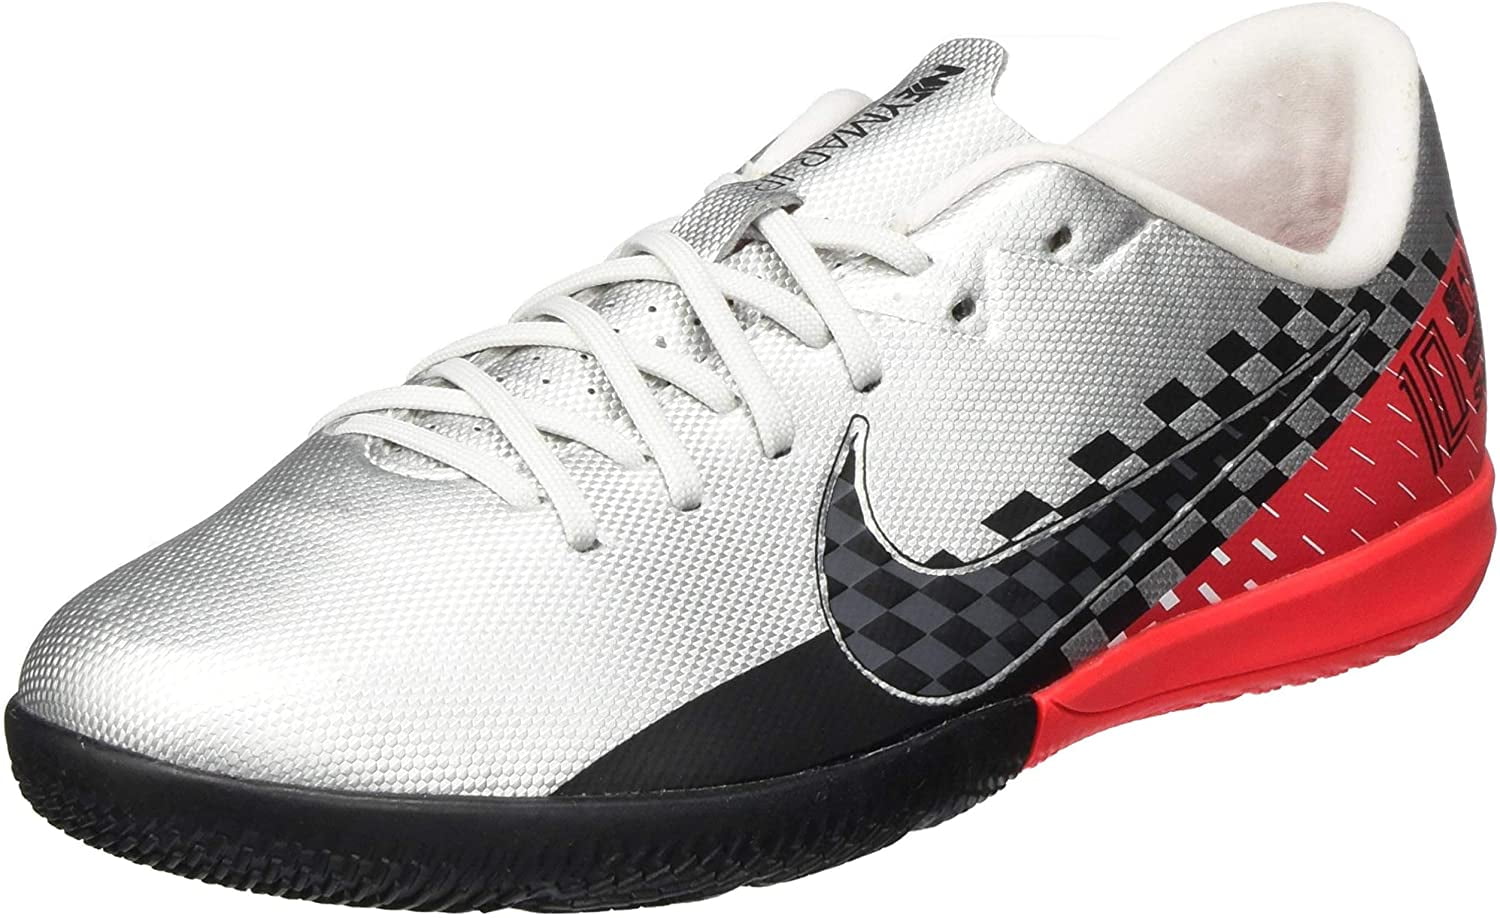 nike youth indoor soccer shoes